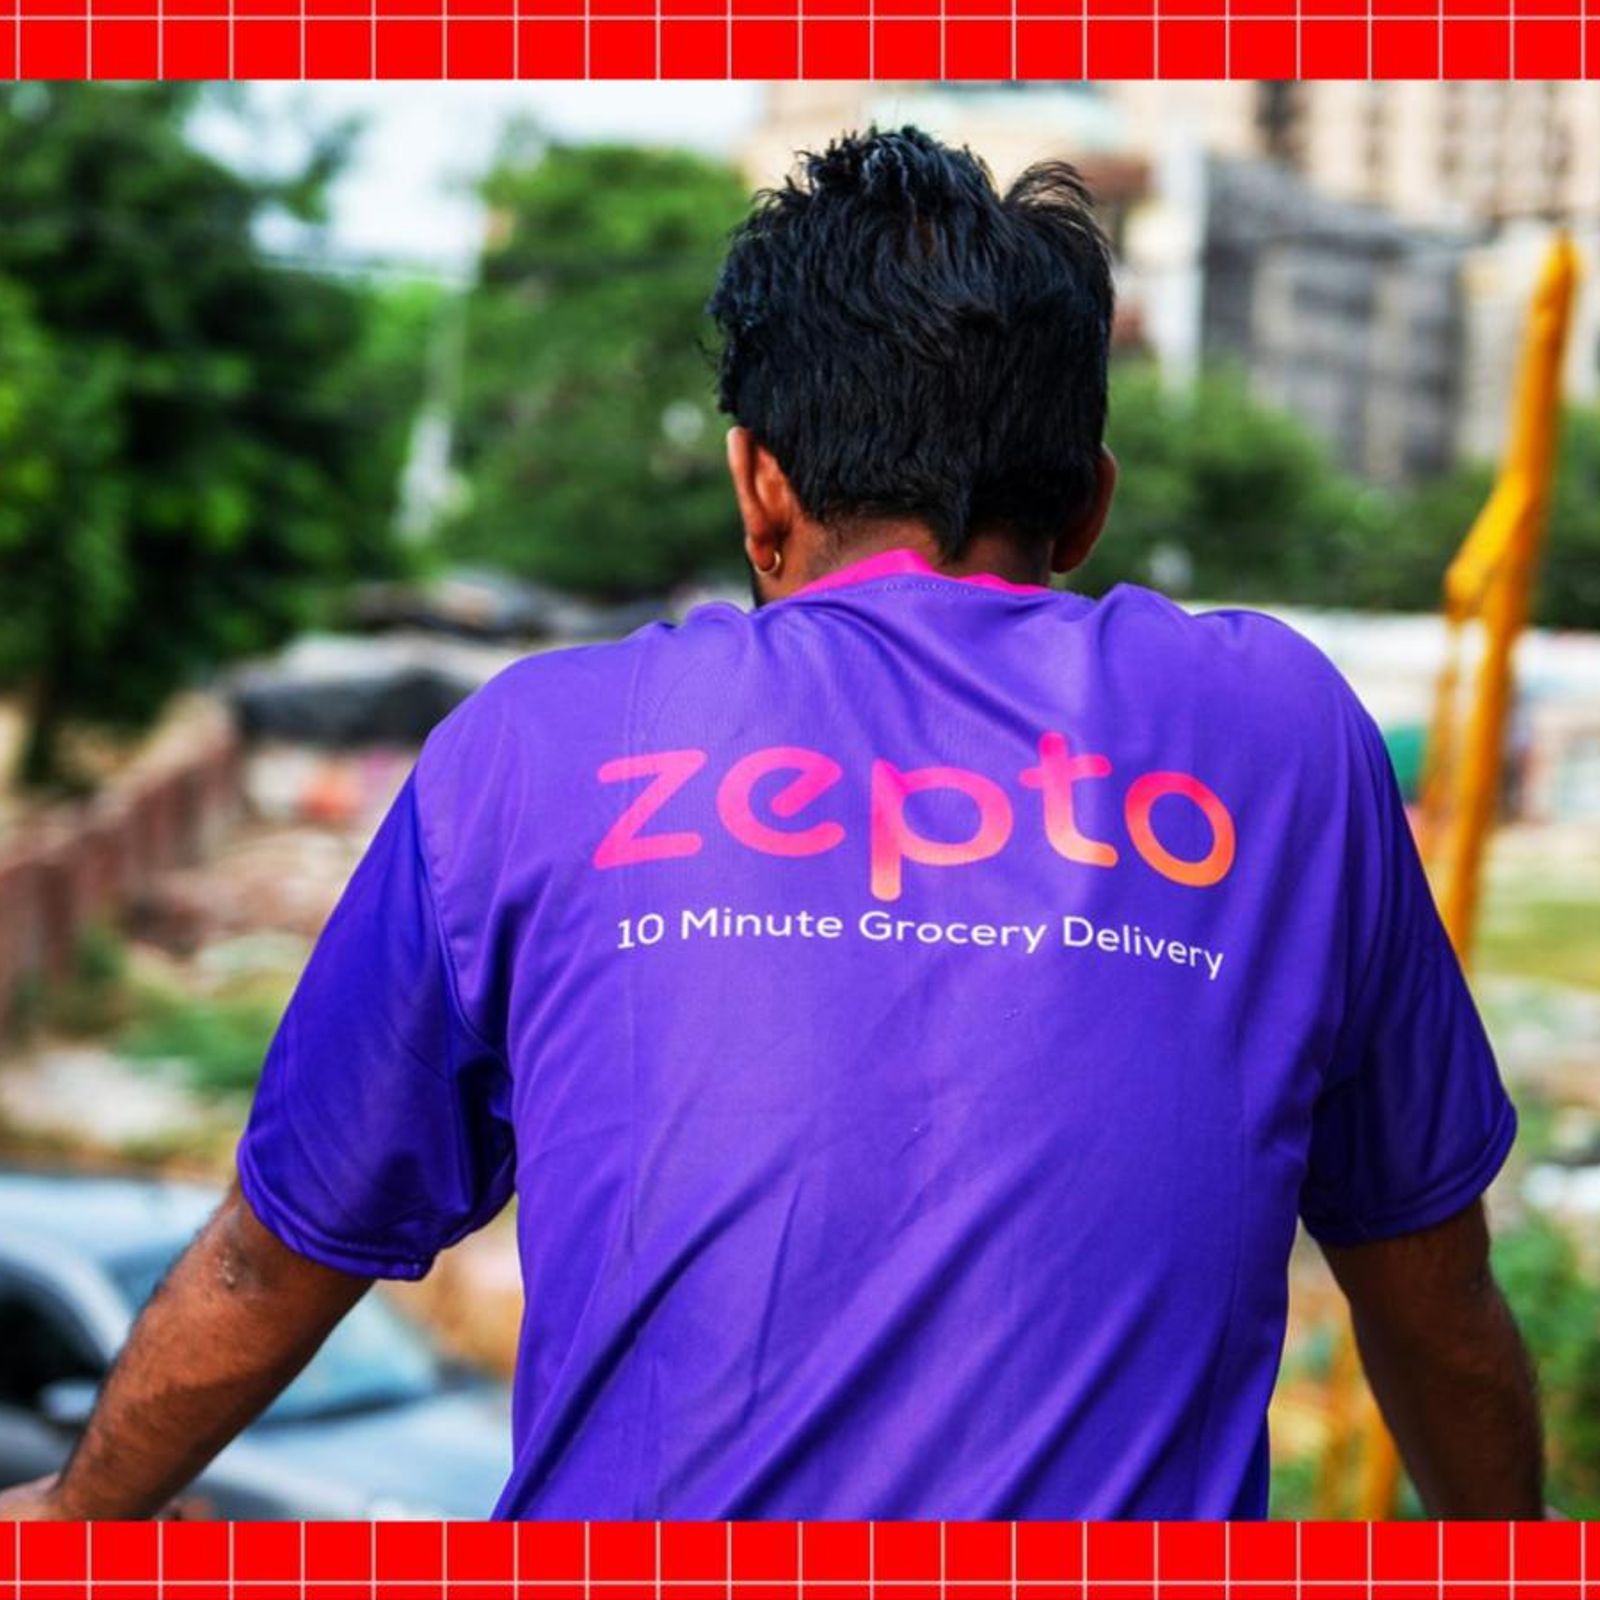 DST Global, Lightspeed Venture Partners to join Zepto's ongoing fundraise: Report

